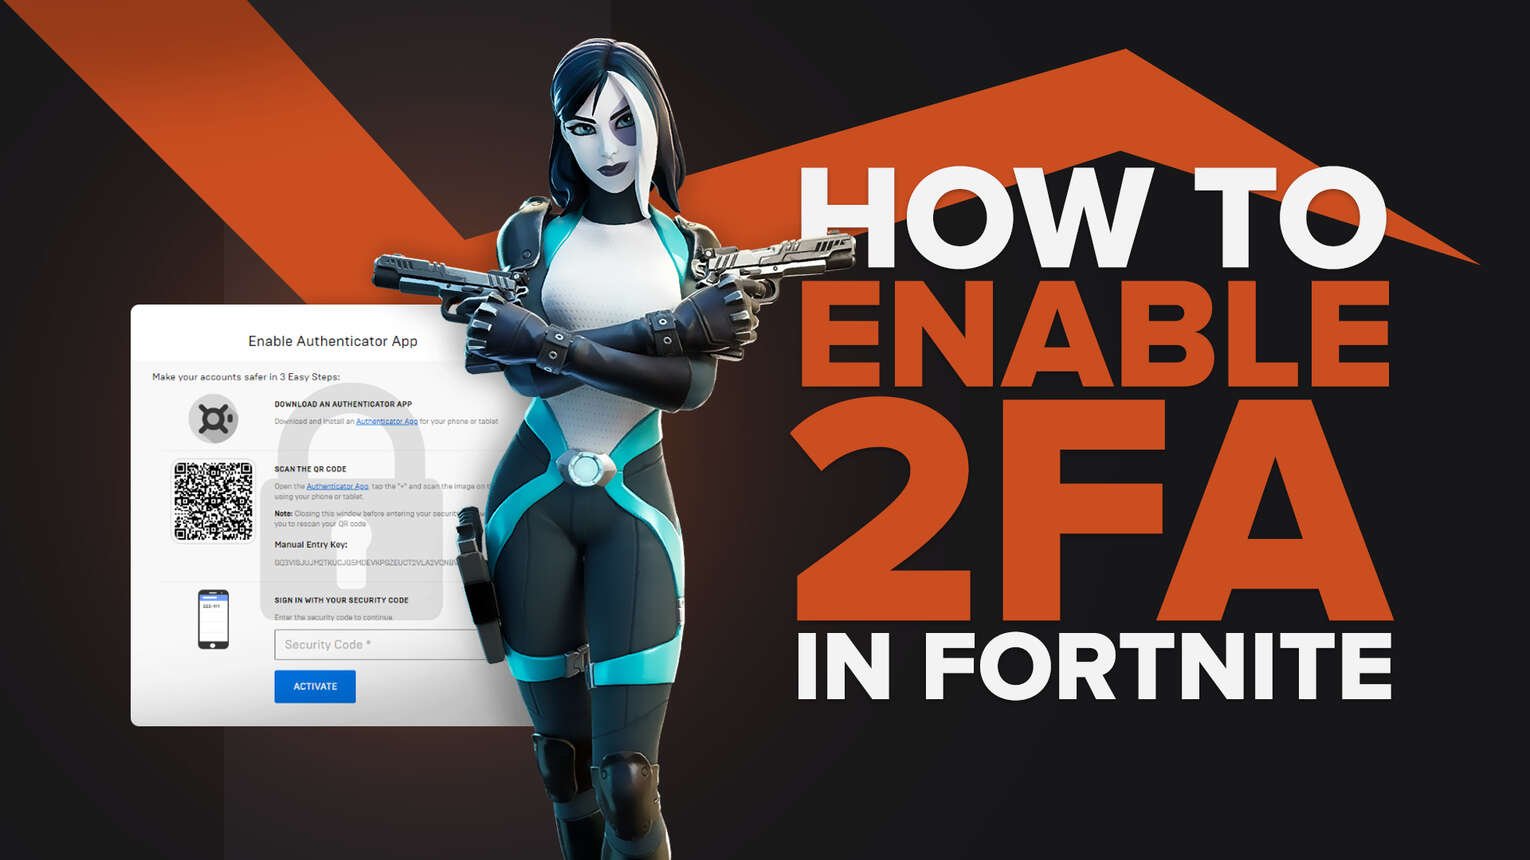 How To Set Up a 2FA in Fortnite to Enjoy a Secure Account